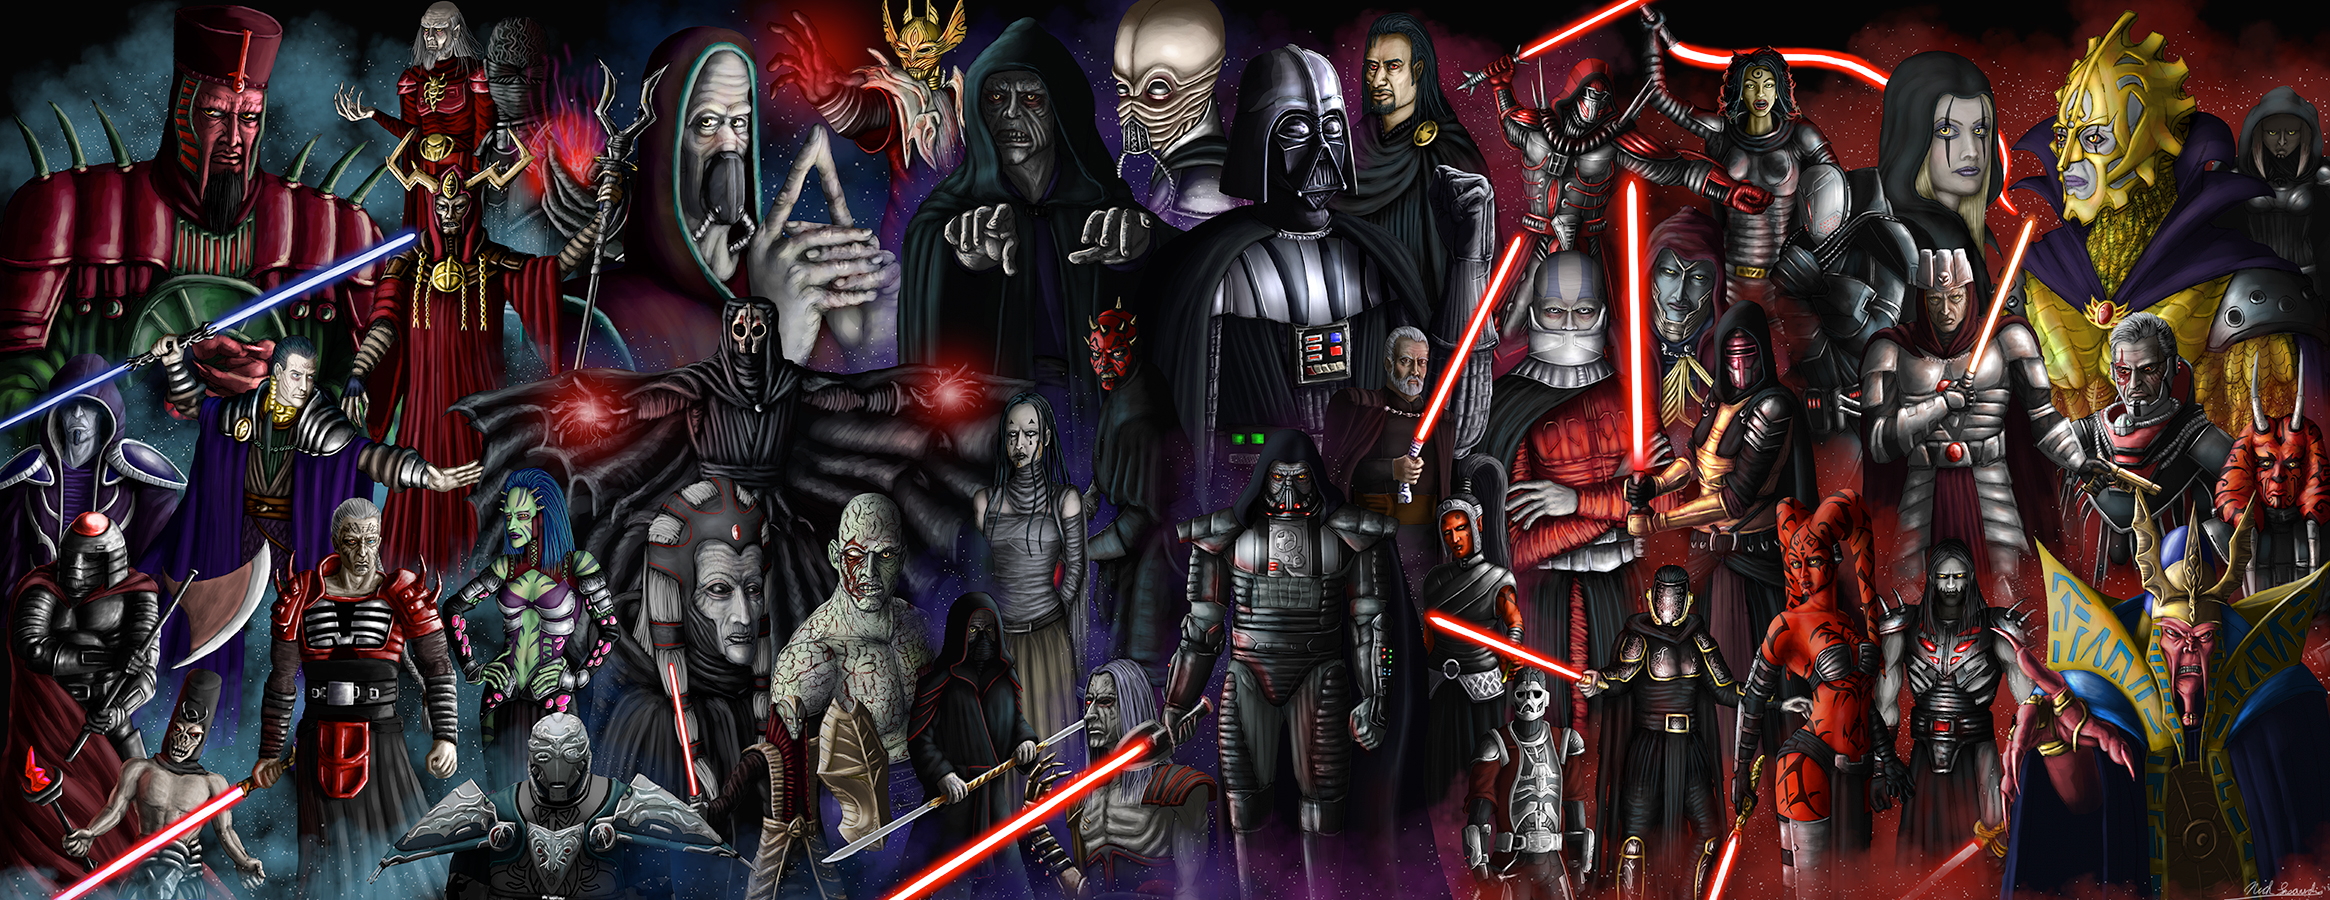 The Sith Lords by mr sinister2048 2330x900